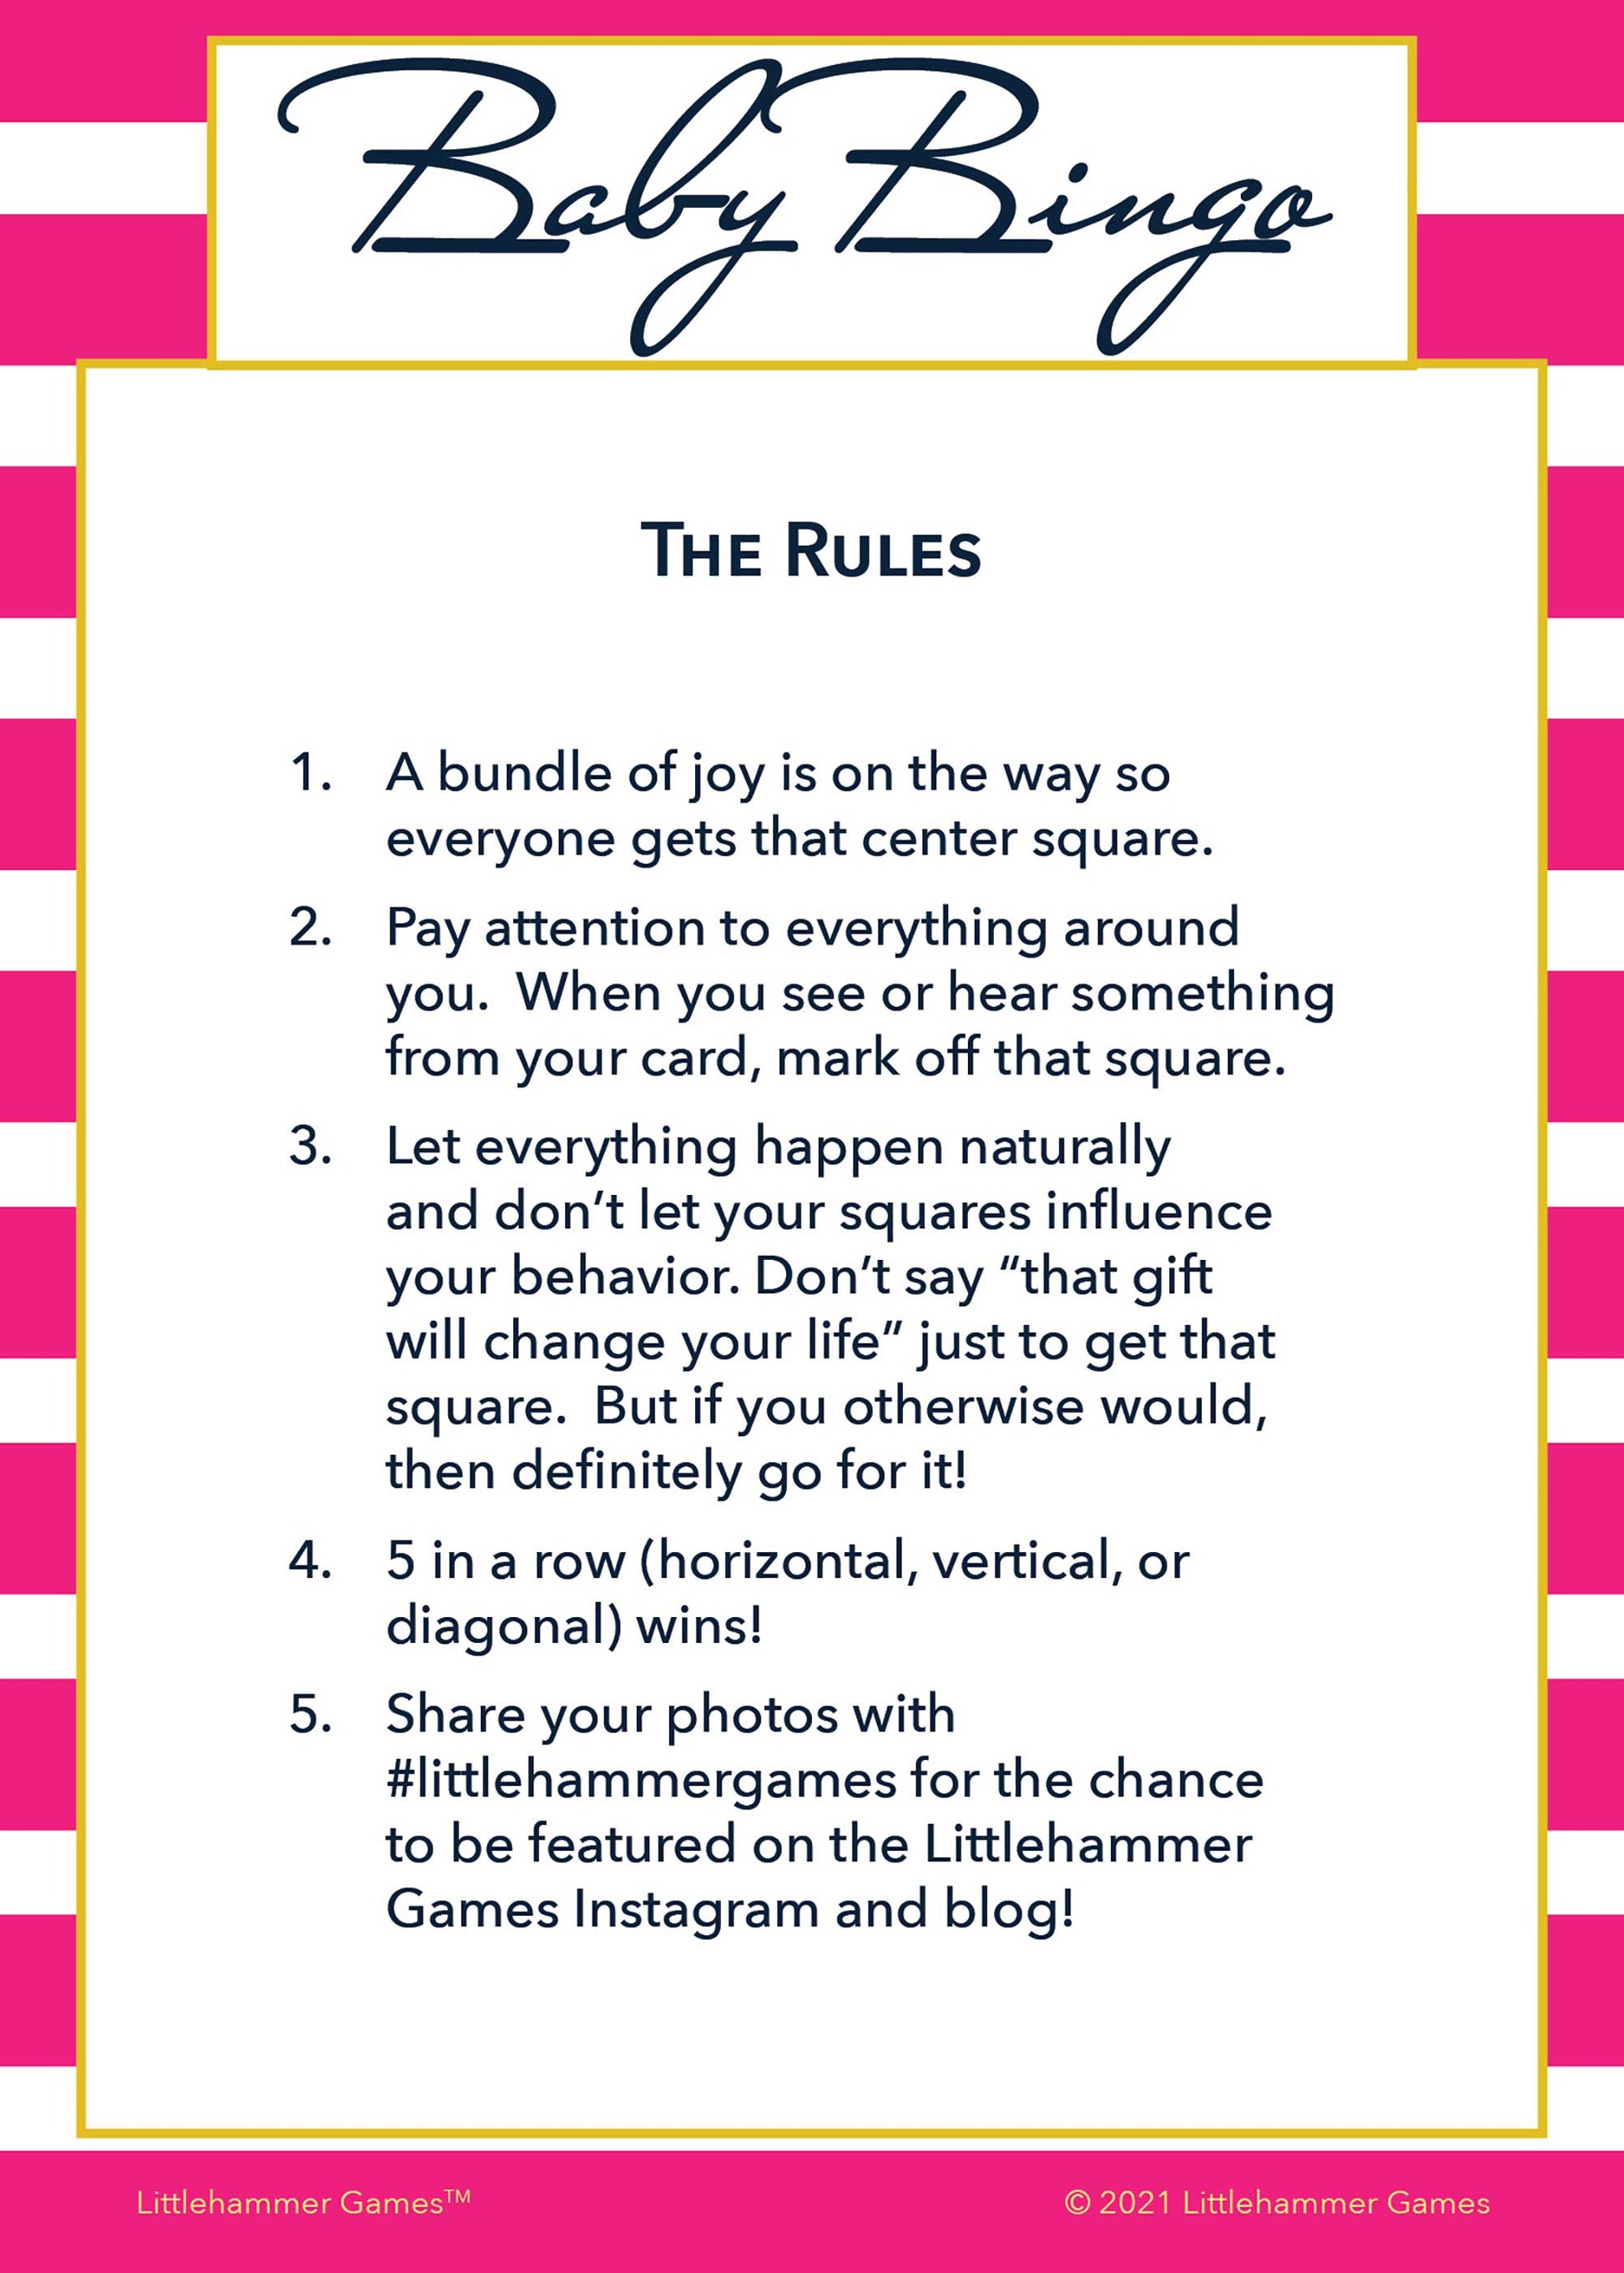 Baby Bingo rules card with a pink-striped background